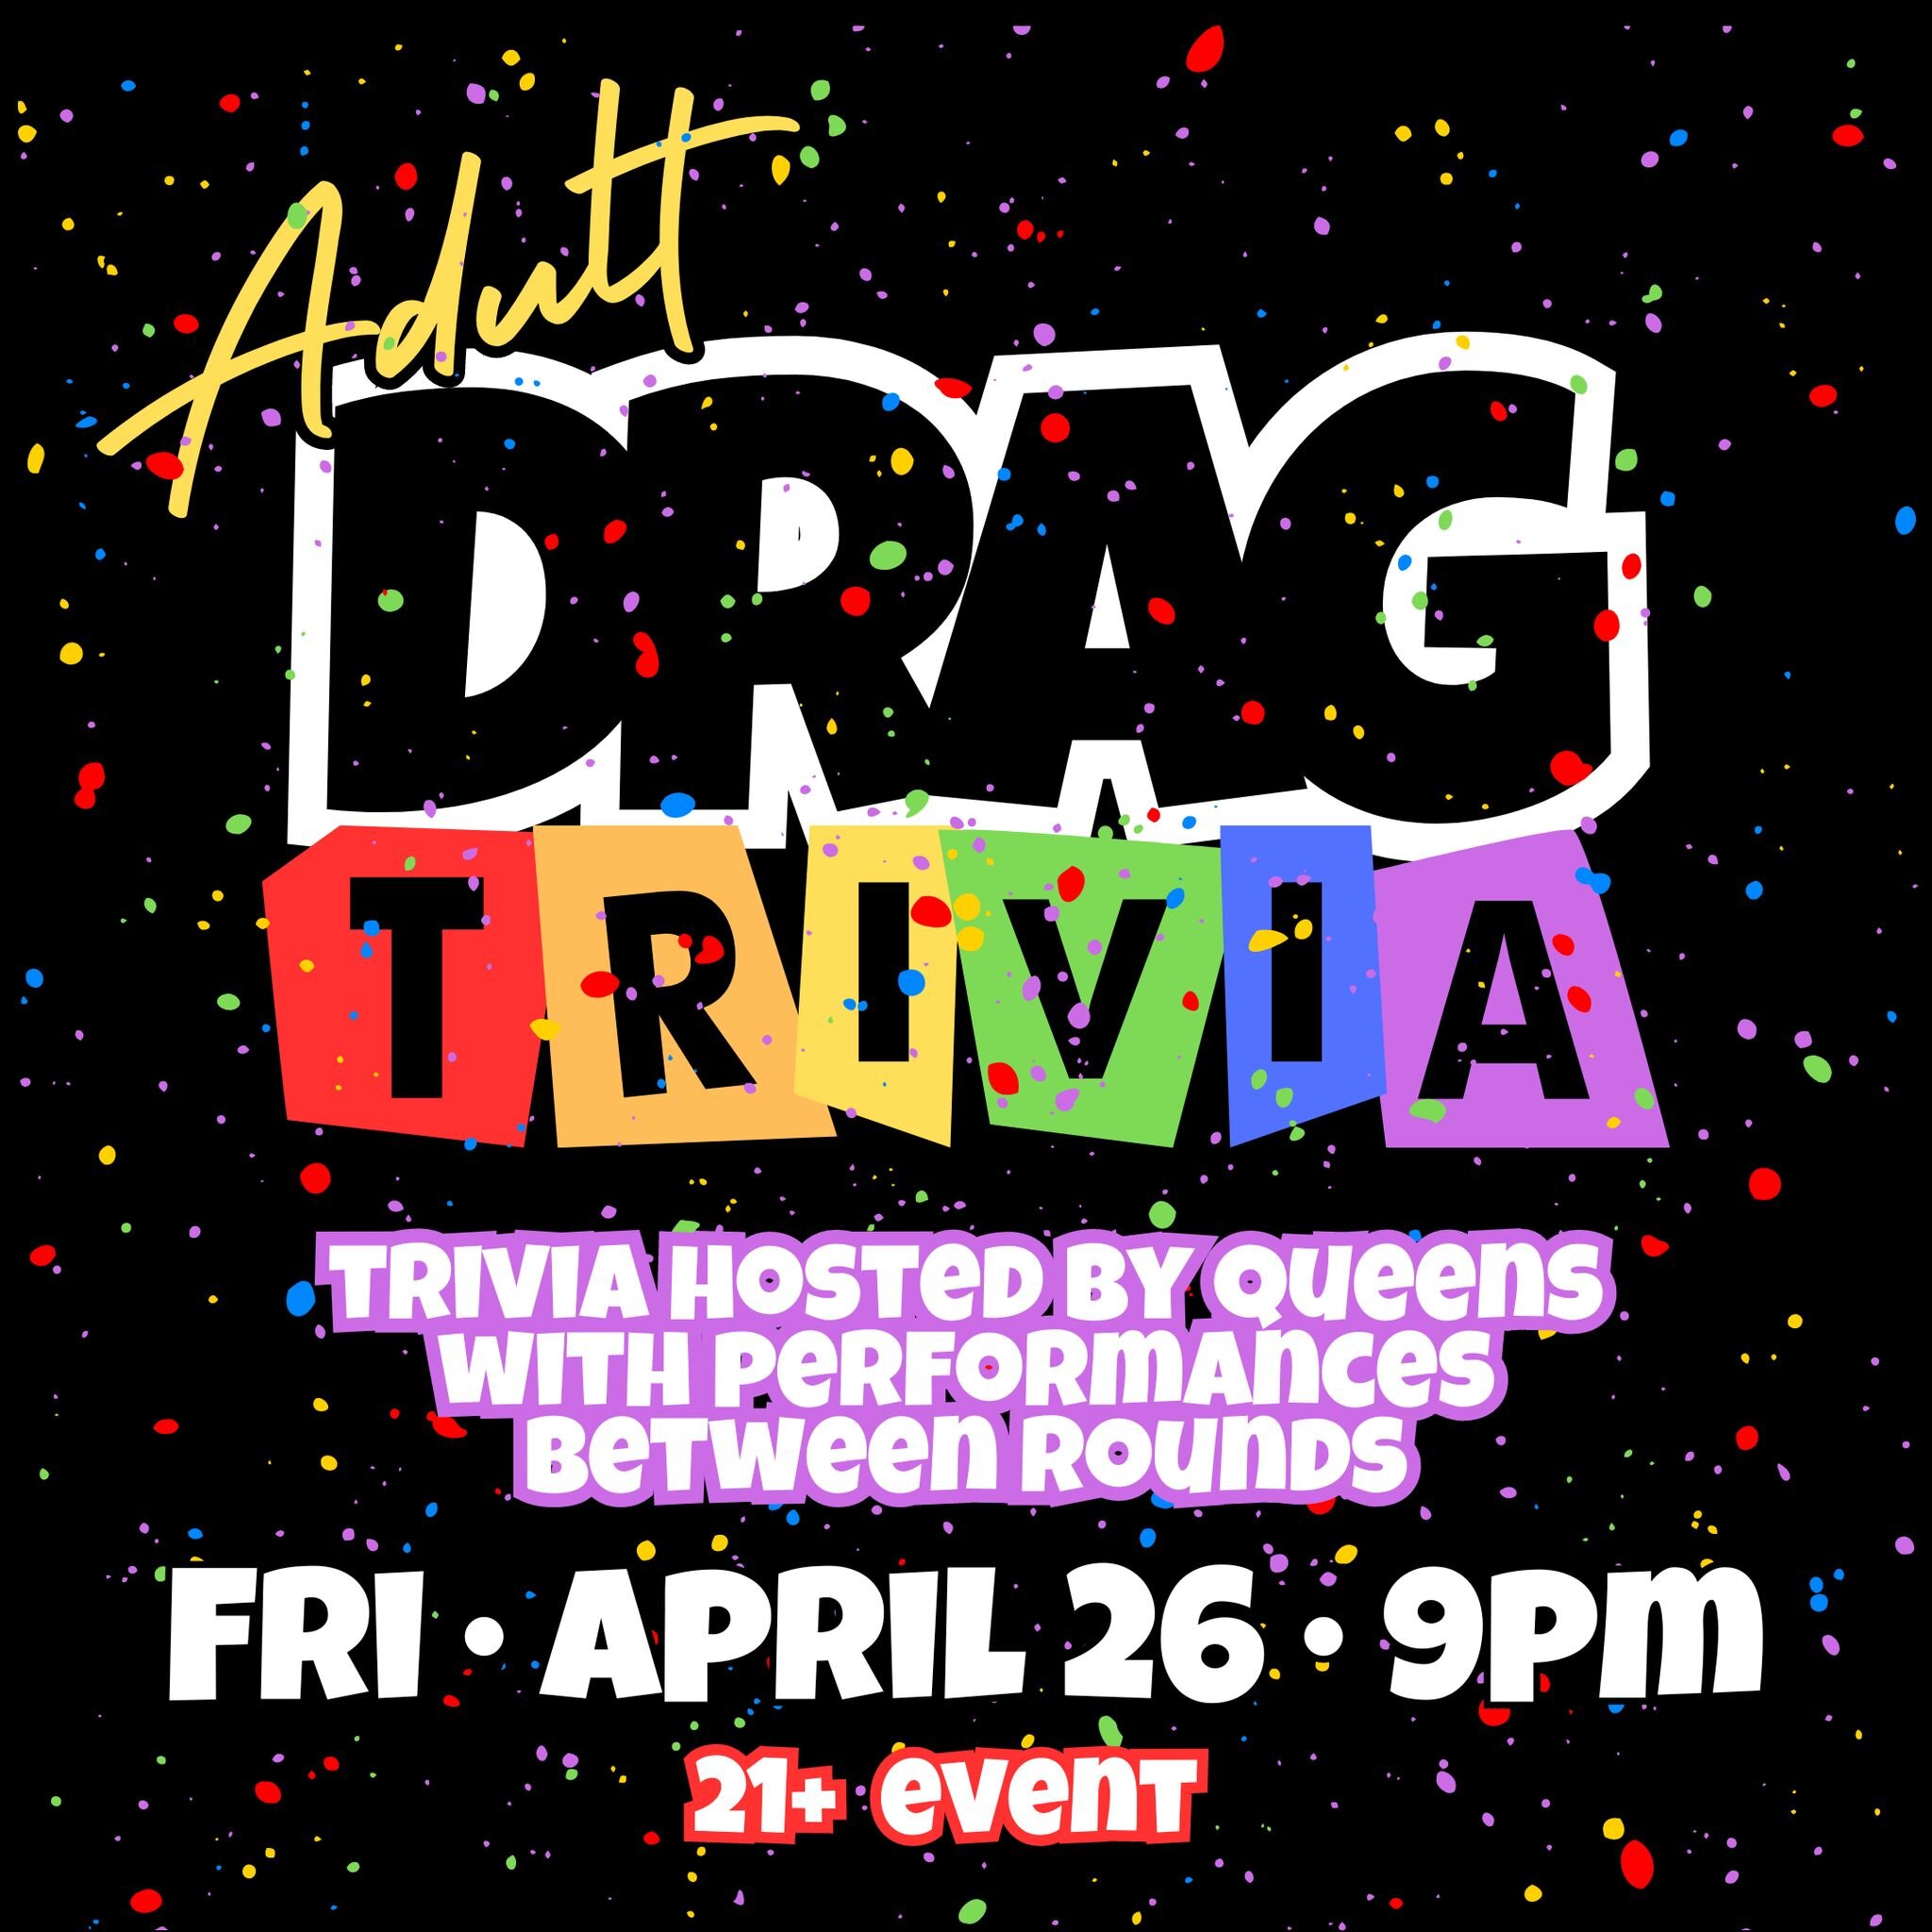 🌟 Let's spice up your Friday night with adult-themed trivia and dazzling drag performances! 💃✨

📅 Date: Friday, April 26
🕘 Time: 9:00 PM
🎉 Event: Adult Trivia Night
👑 Hosted By: Fabulous Queens with Jaw-Dropping Acts

Join us for a night of bra